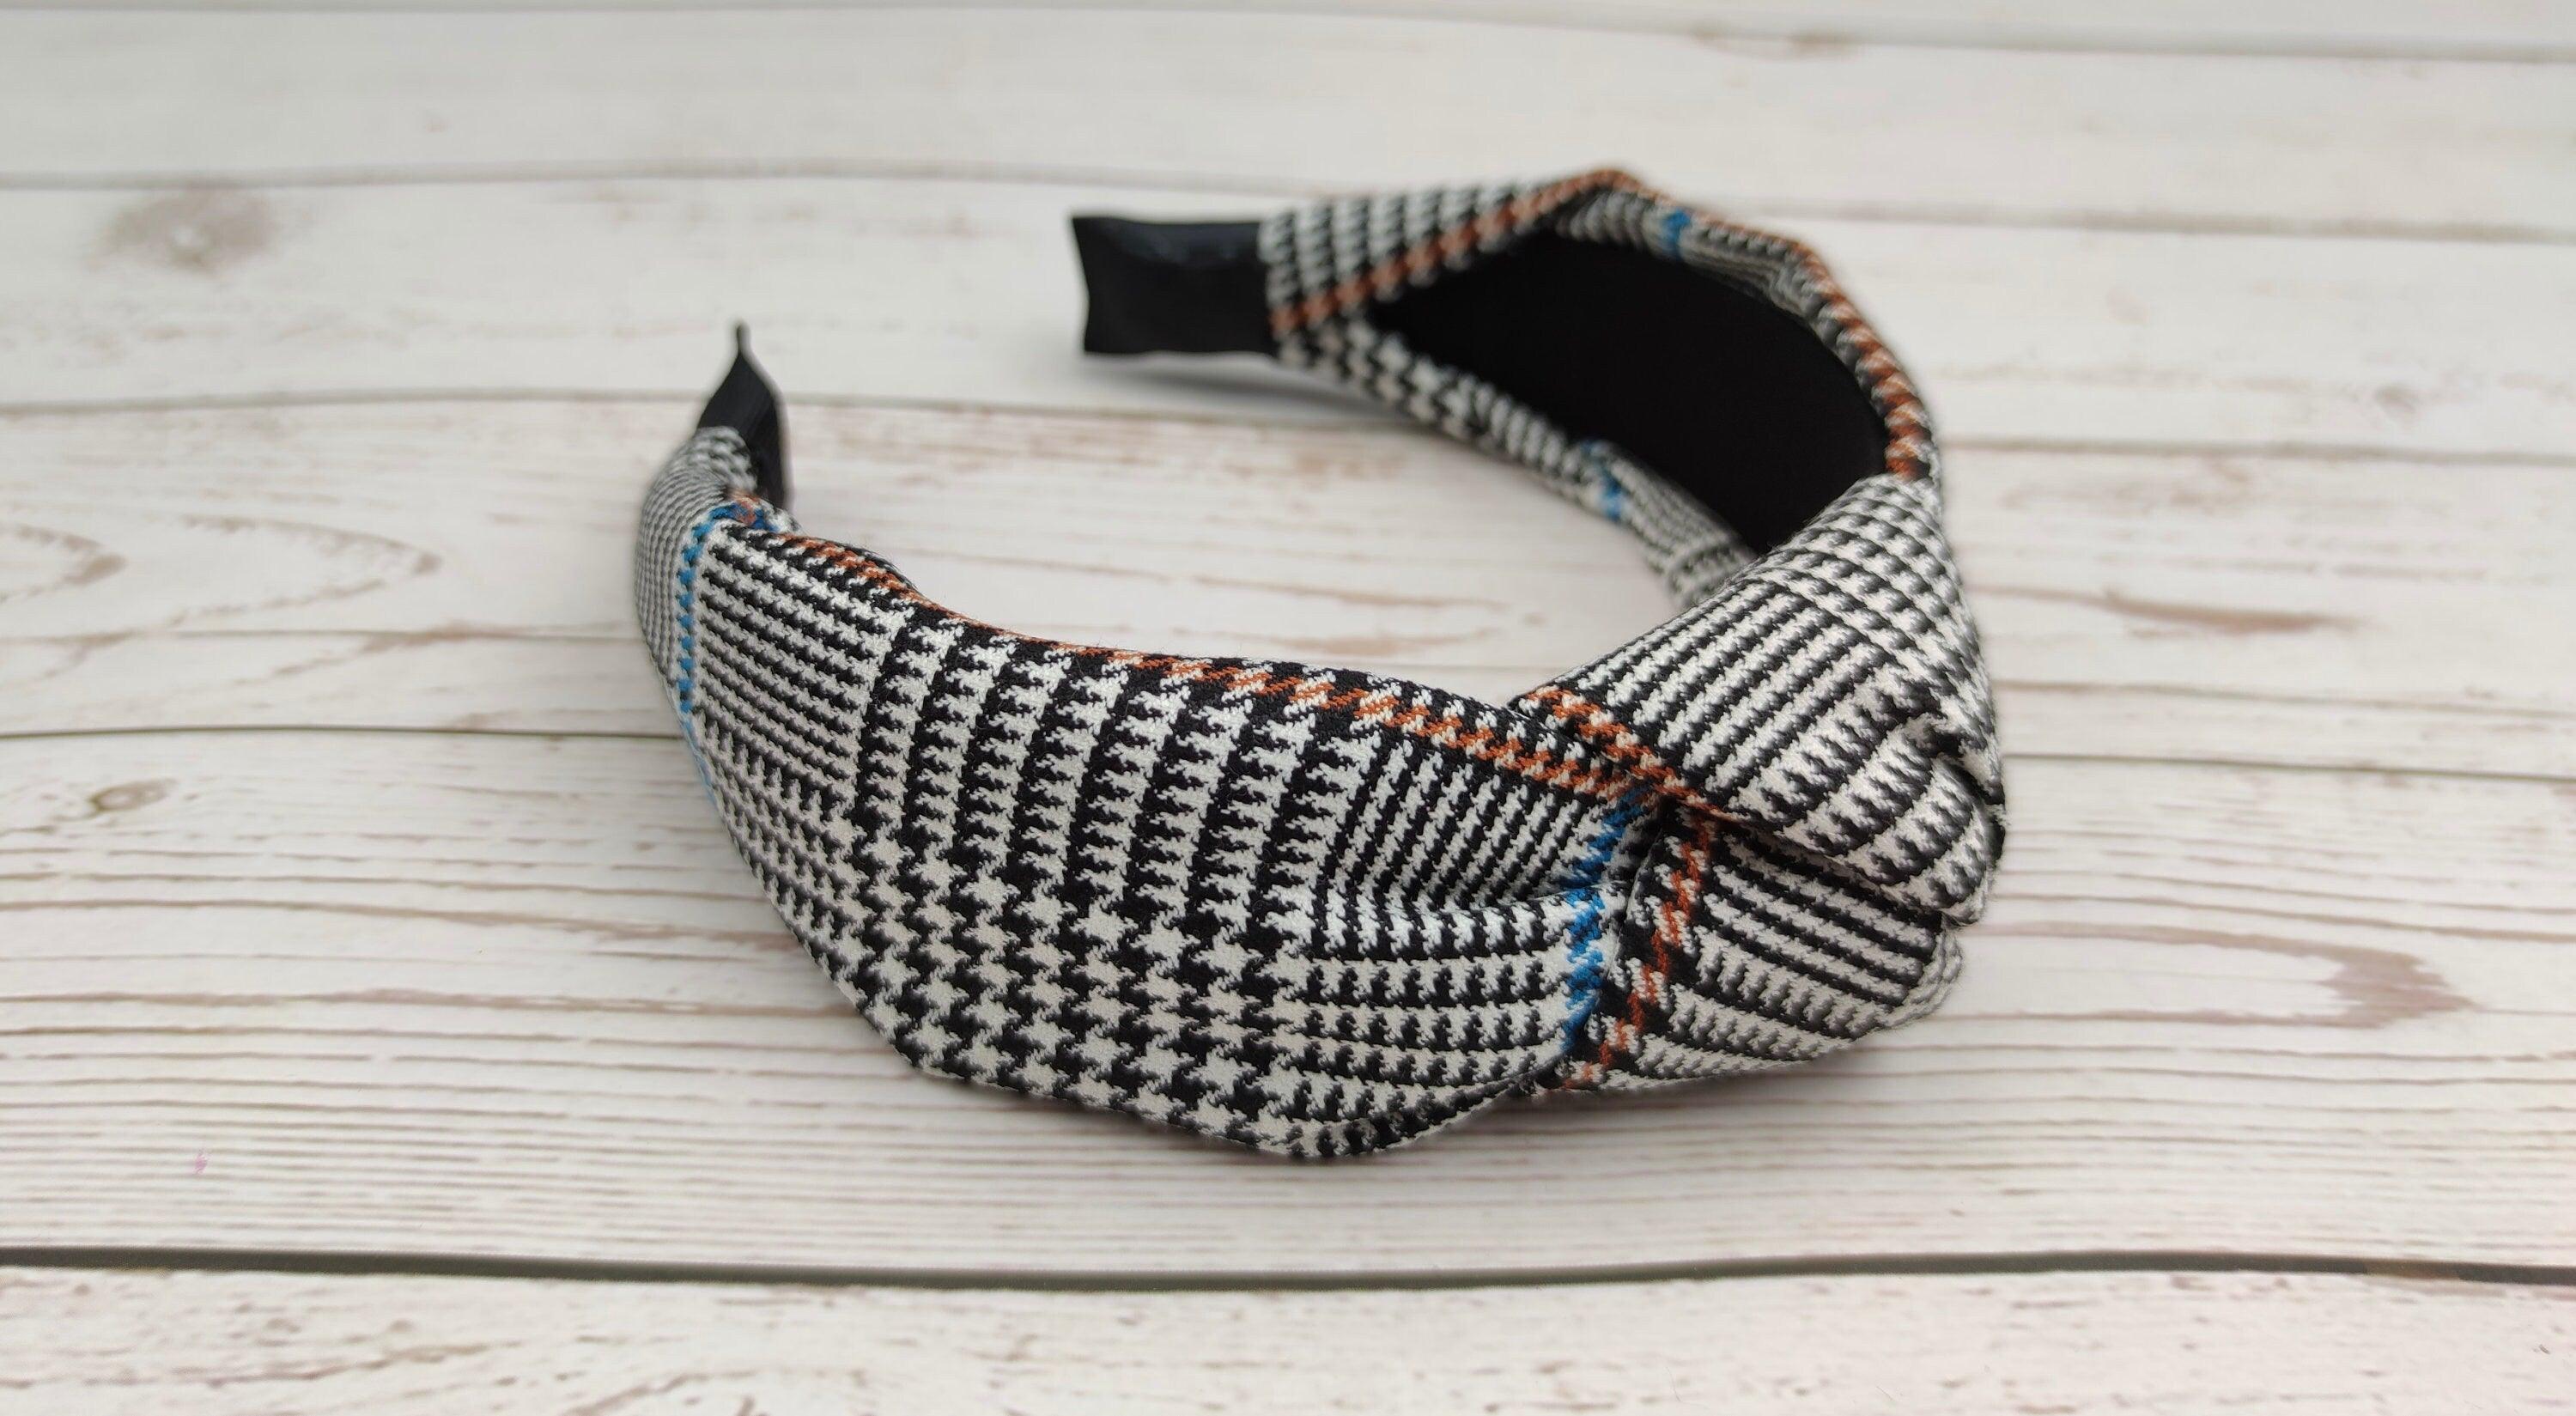 High-Quality Classic Knotted Crepe Headband in White and Black, Perfect for College Fashion and Everyday Wear - Featuring Blue and Orange Stripes available at Moyoni Design